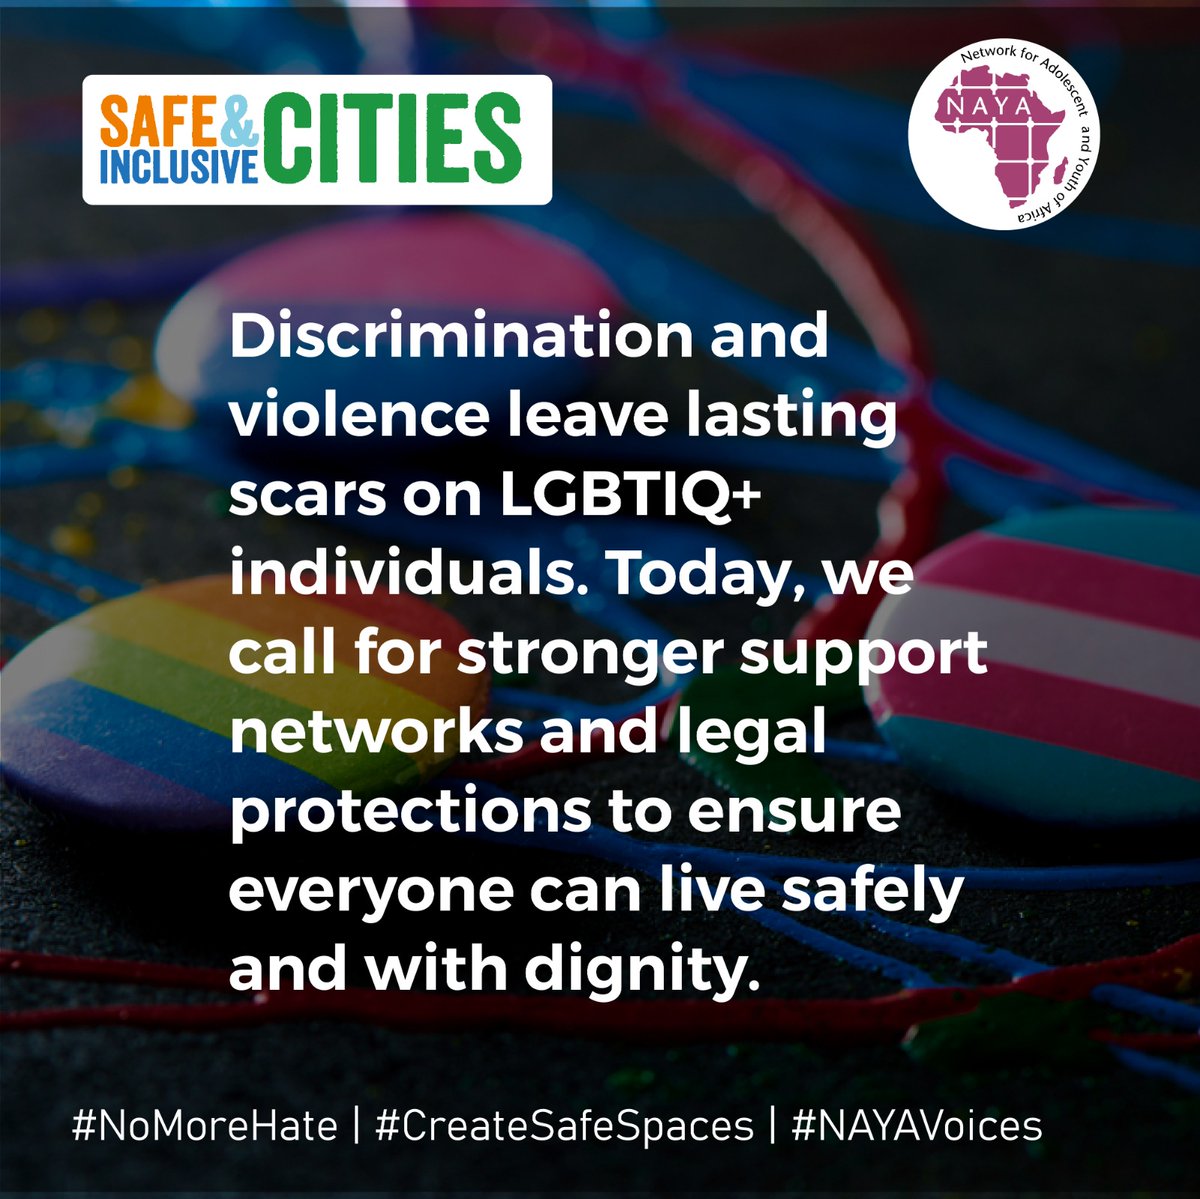 LGBTQ+ individuals often face employment discrimination, affecting their economic stability and career growth. We need inclusive hiring practices and workplace environments. #NoMoreHate #CreateSafeSpaces #NAYAVoices